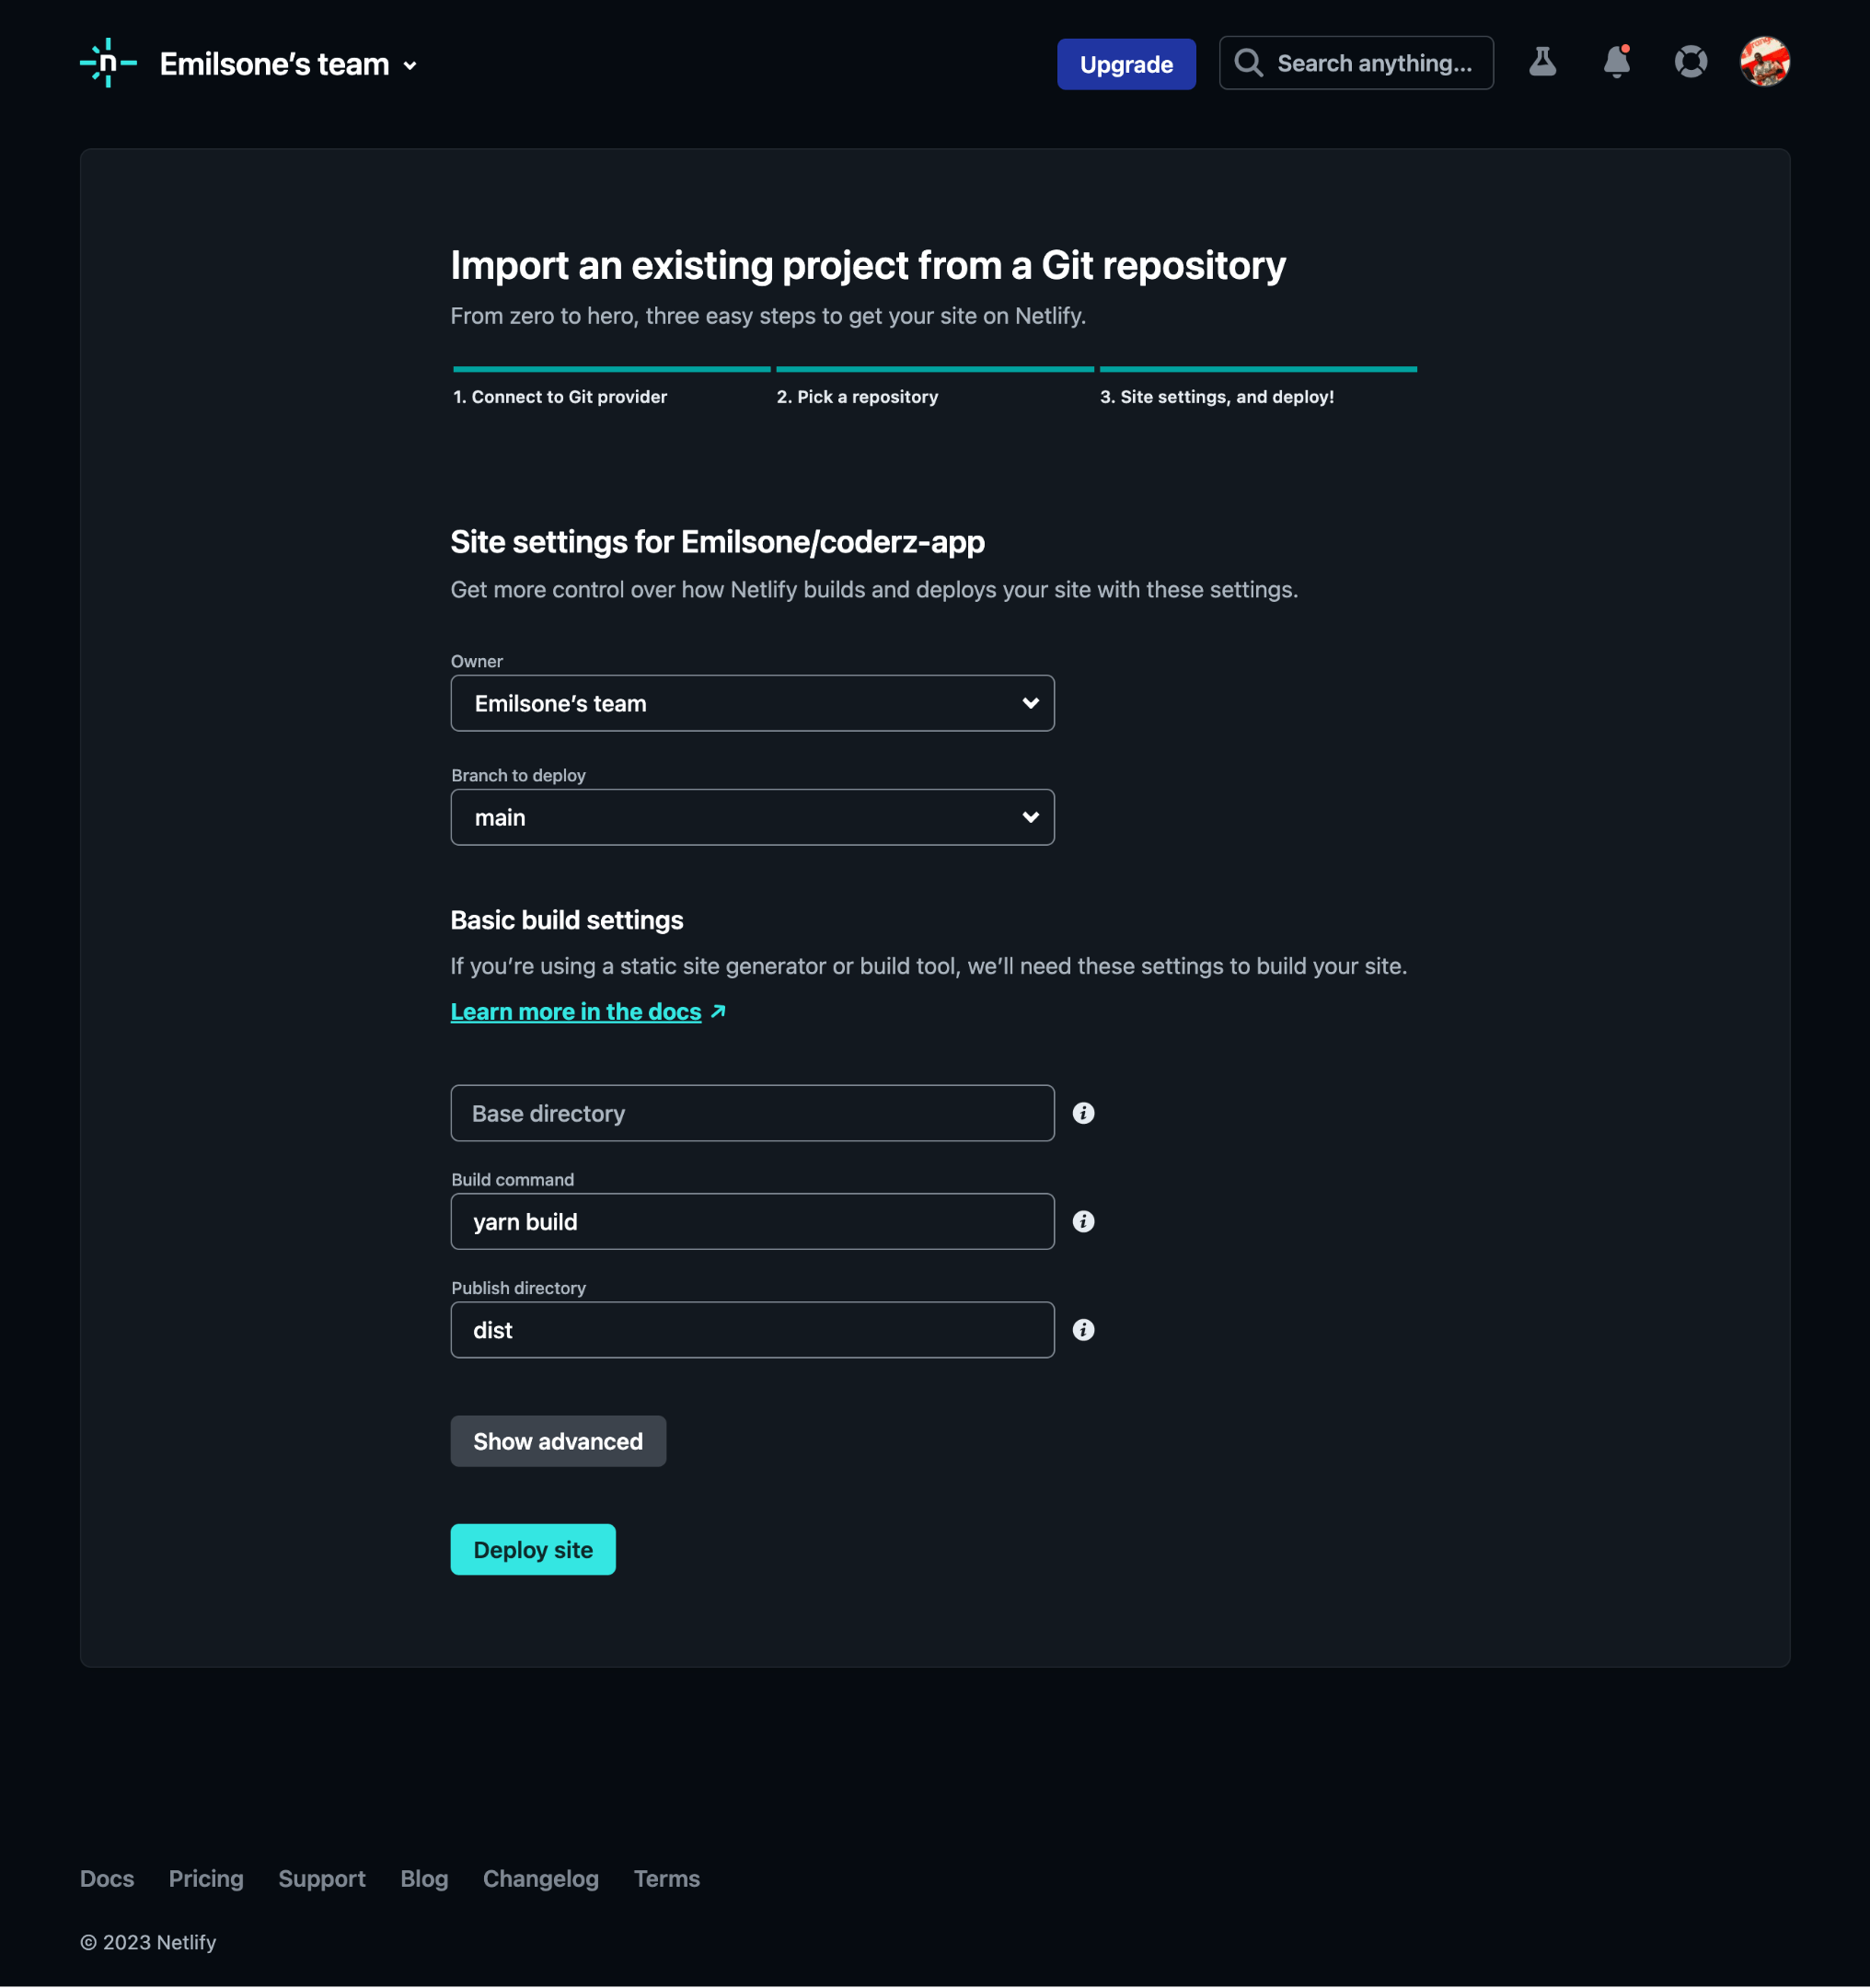 Site settings for poject, basic build settings, and a button for deploy